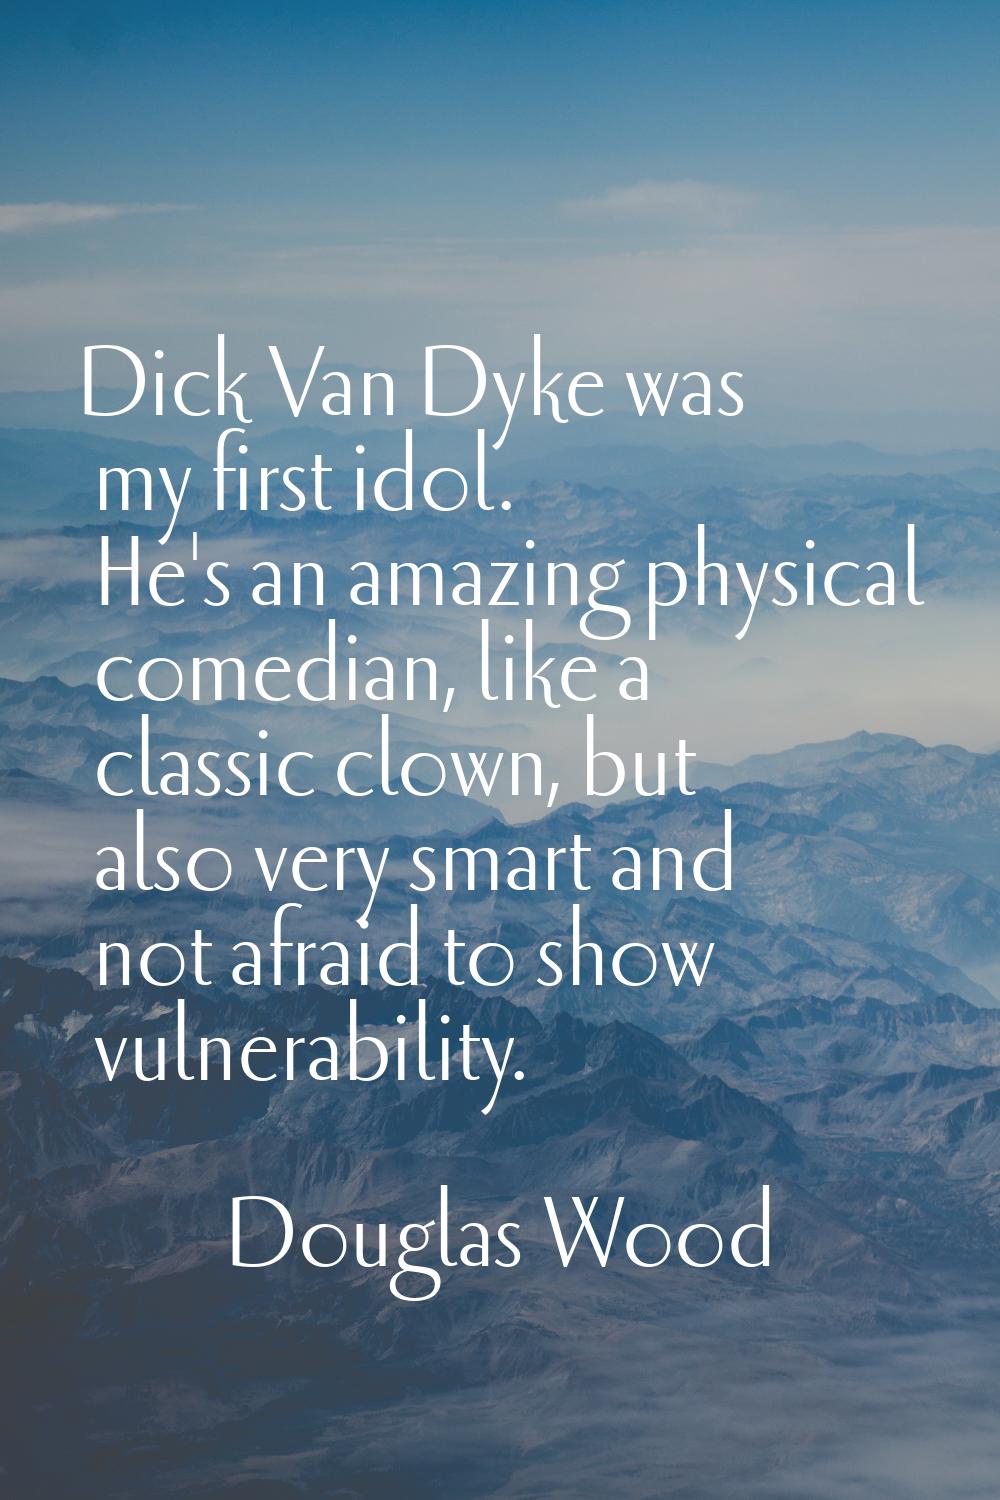 Dick Van Dyke was my first idol. He's an amazing physical comedian, like a classic clown, but also 